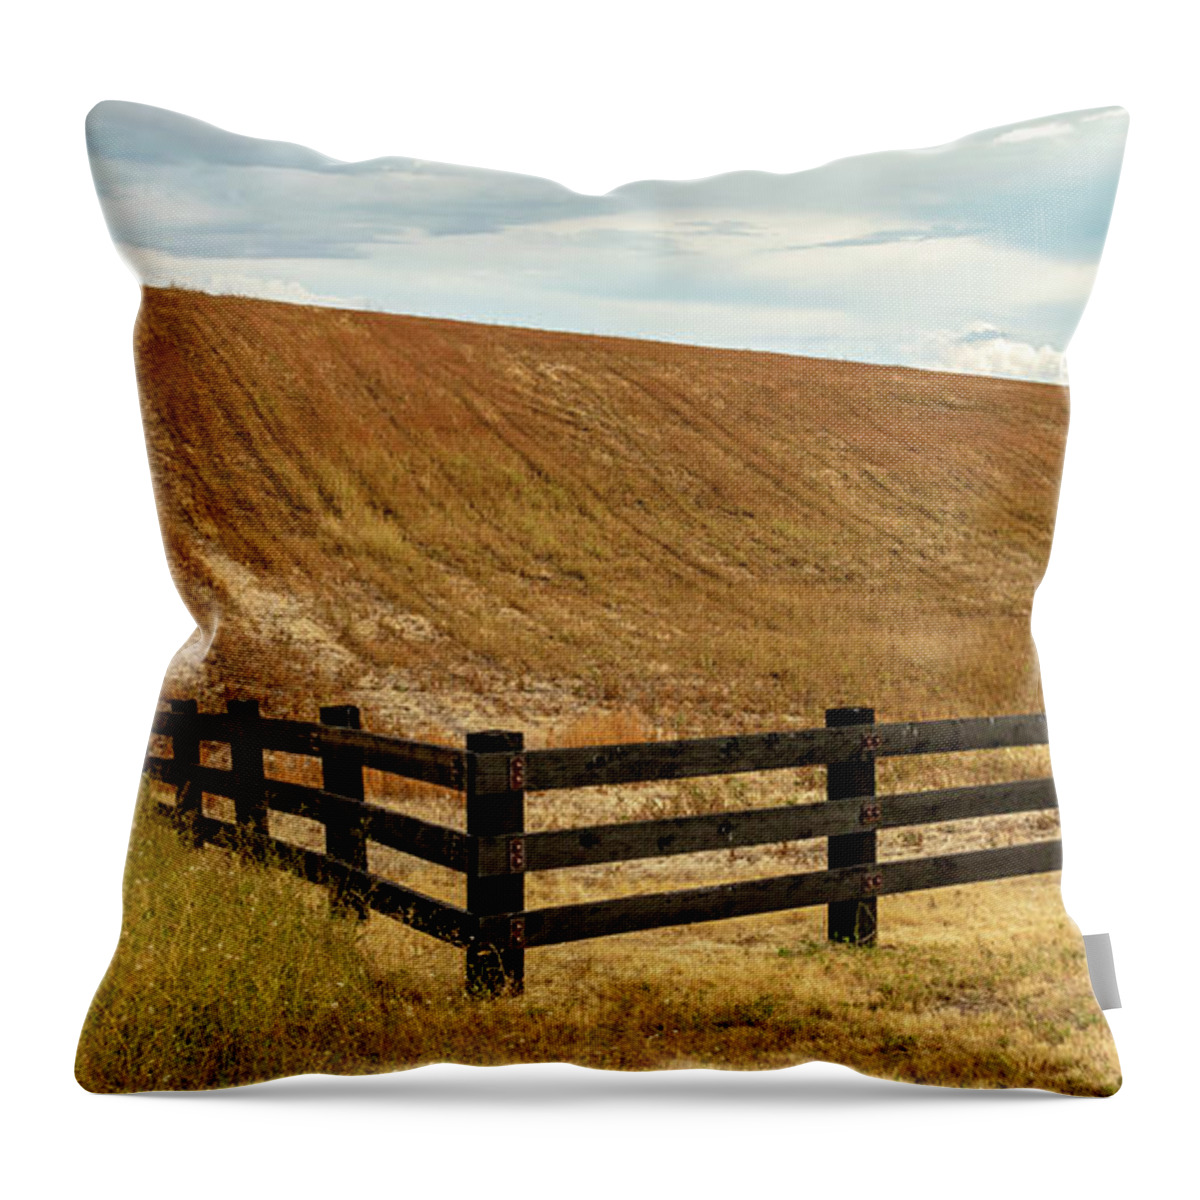 Landscapes Throw Pillow featuring the photograph Property Lines by Claude Dalley